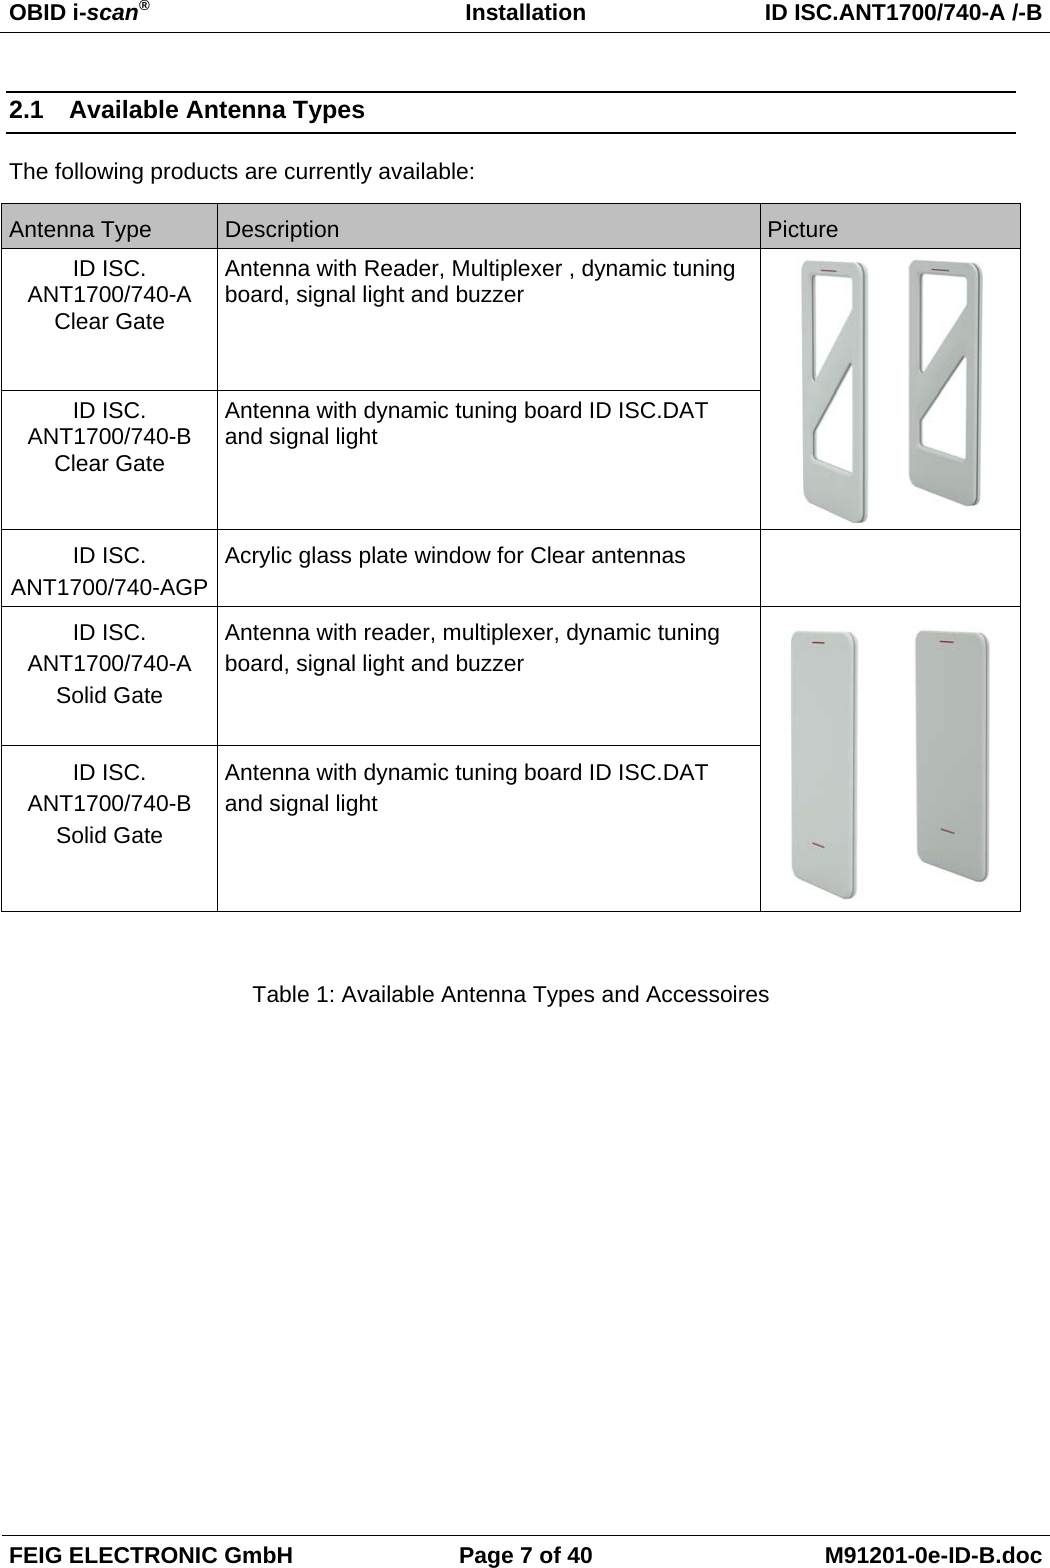 OBID i-scan®   Installation  ID ISC.ANT1700/740-A /-B FEIG ELECTRONIC GmbH  Page 7 of 40  M91201-0e-ID-B.doc 2.1  Available Antenna Types The following products are currently available: Antenna Type  Description  Picture ID ISC. ANT1700/740-A Clear Gate Antenna with Reader, Multiplexer , dynamic tuning board, signal light and buzzer  ID ISC. ANT1700/740-B Clear Gate Antenna with dynamic tuning board ID ISC.DAT and signal light ID ISC. ANT1700/740-AGP Acrylic glass plate window for Clear antennas   ID ISC. ANT1700/740-A Solid Gate Antenna with reader, multiplexer, dynamic tuning board, signal light and buzzer ID ISC. ANT1700/740-B Solid Gate Antenna with dynamic tuning board ID ISC.DAT and signal light  Table 1: Available Antenna Types and Accessoires  